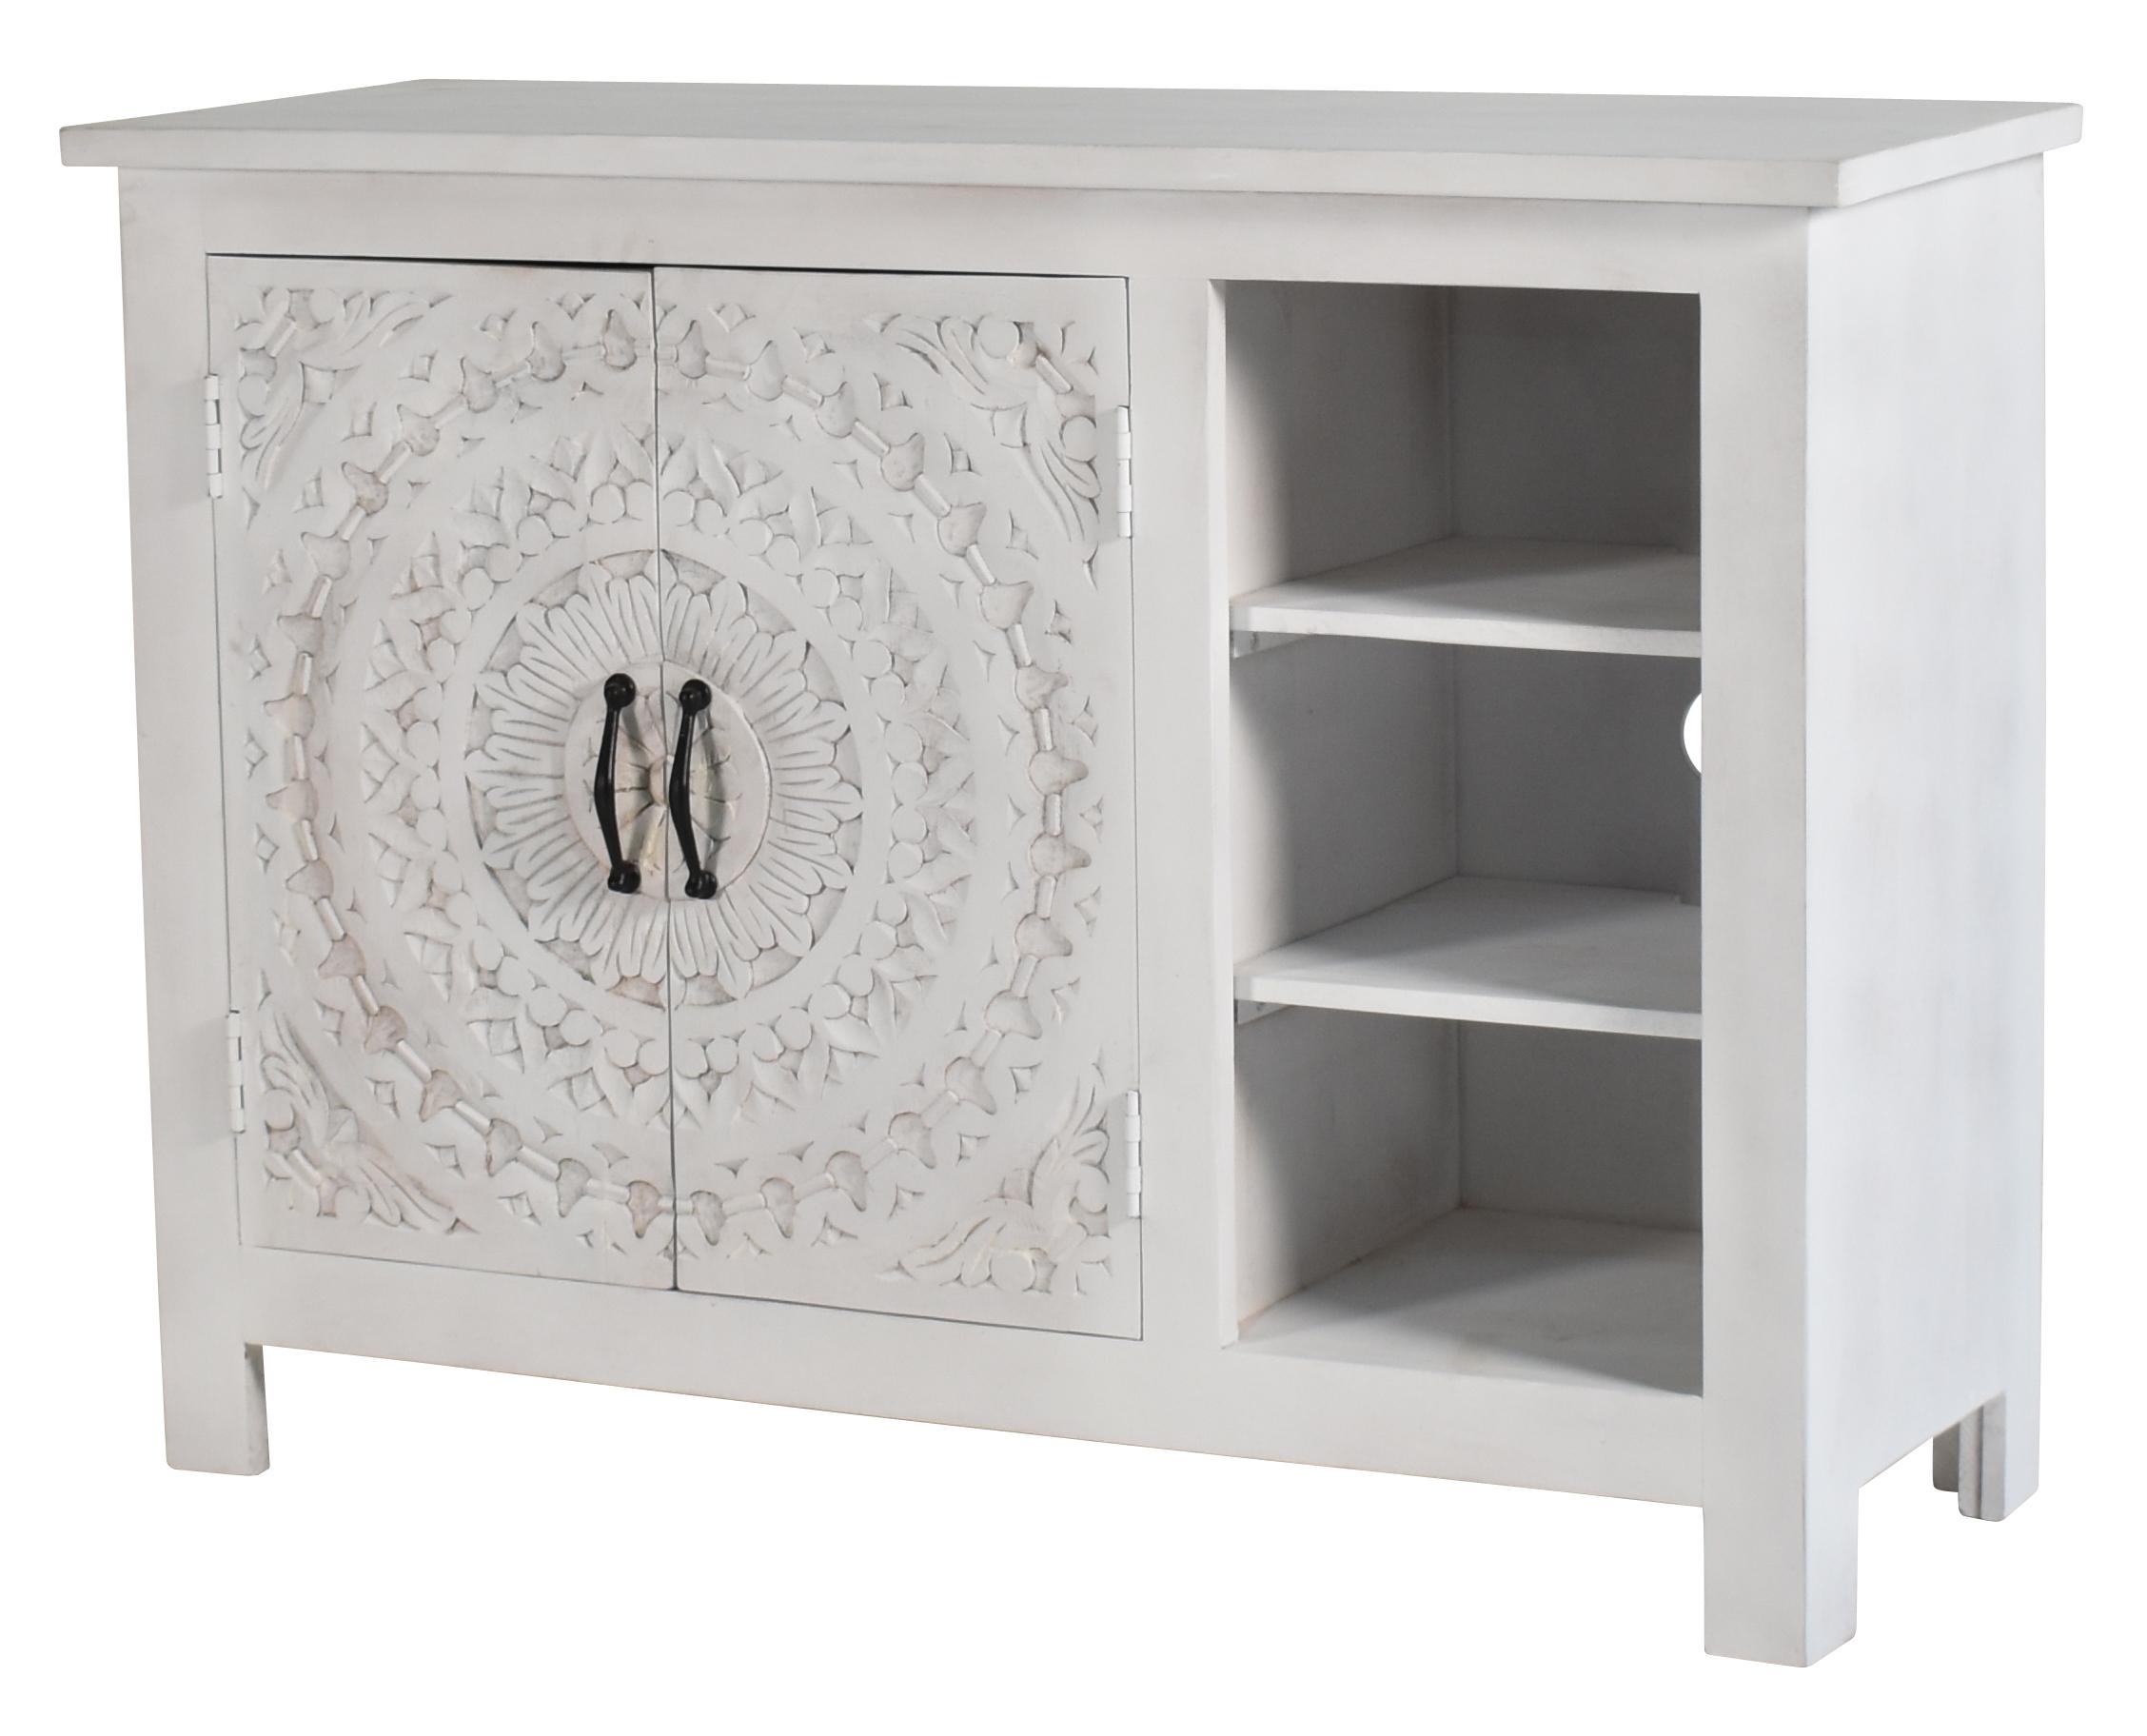 Transitional Media Chest SS-10275-SO SS-10275-SO in whitewash 